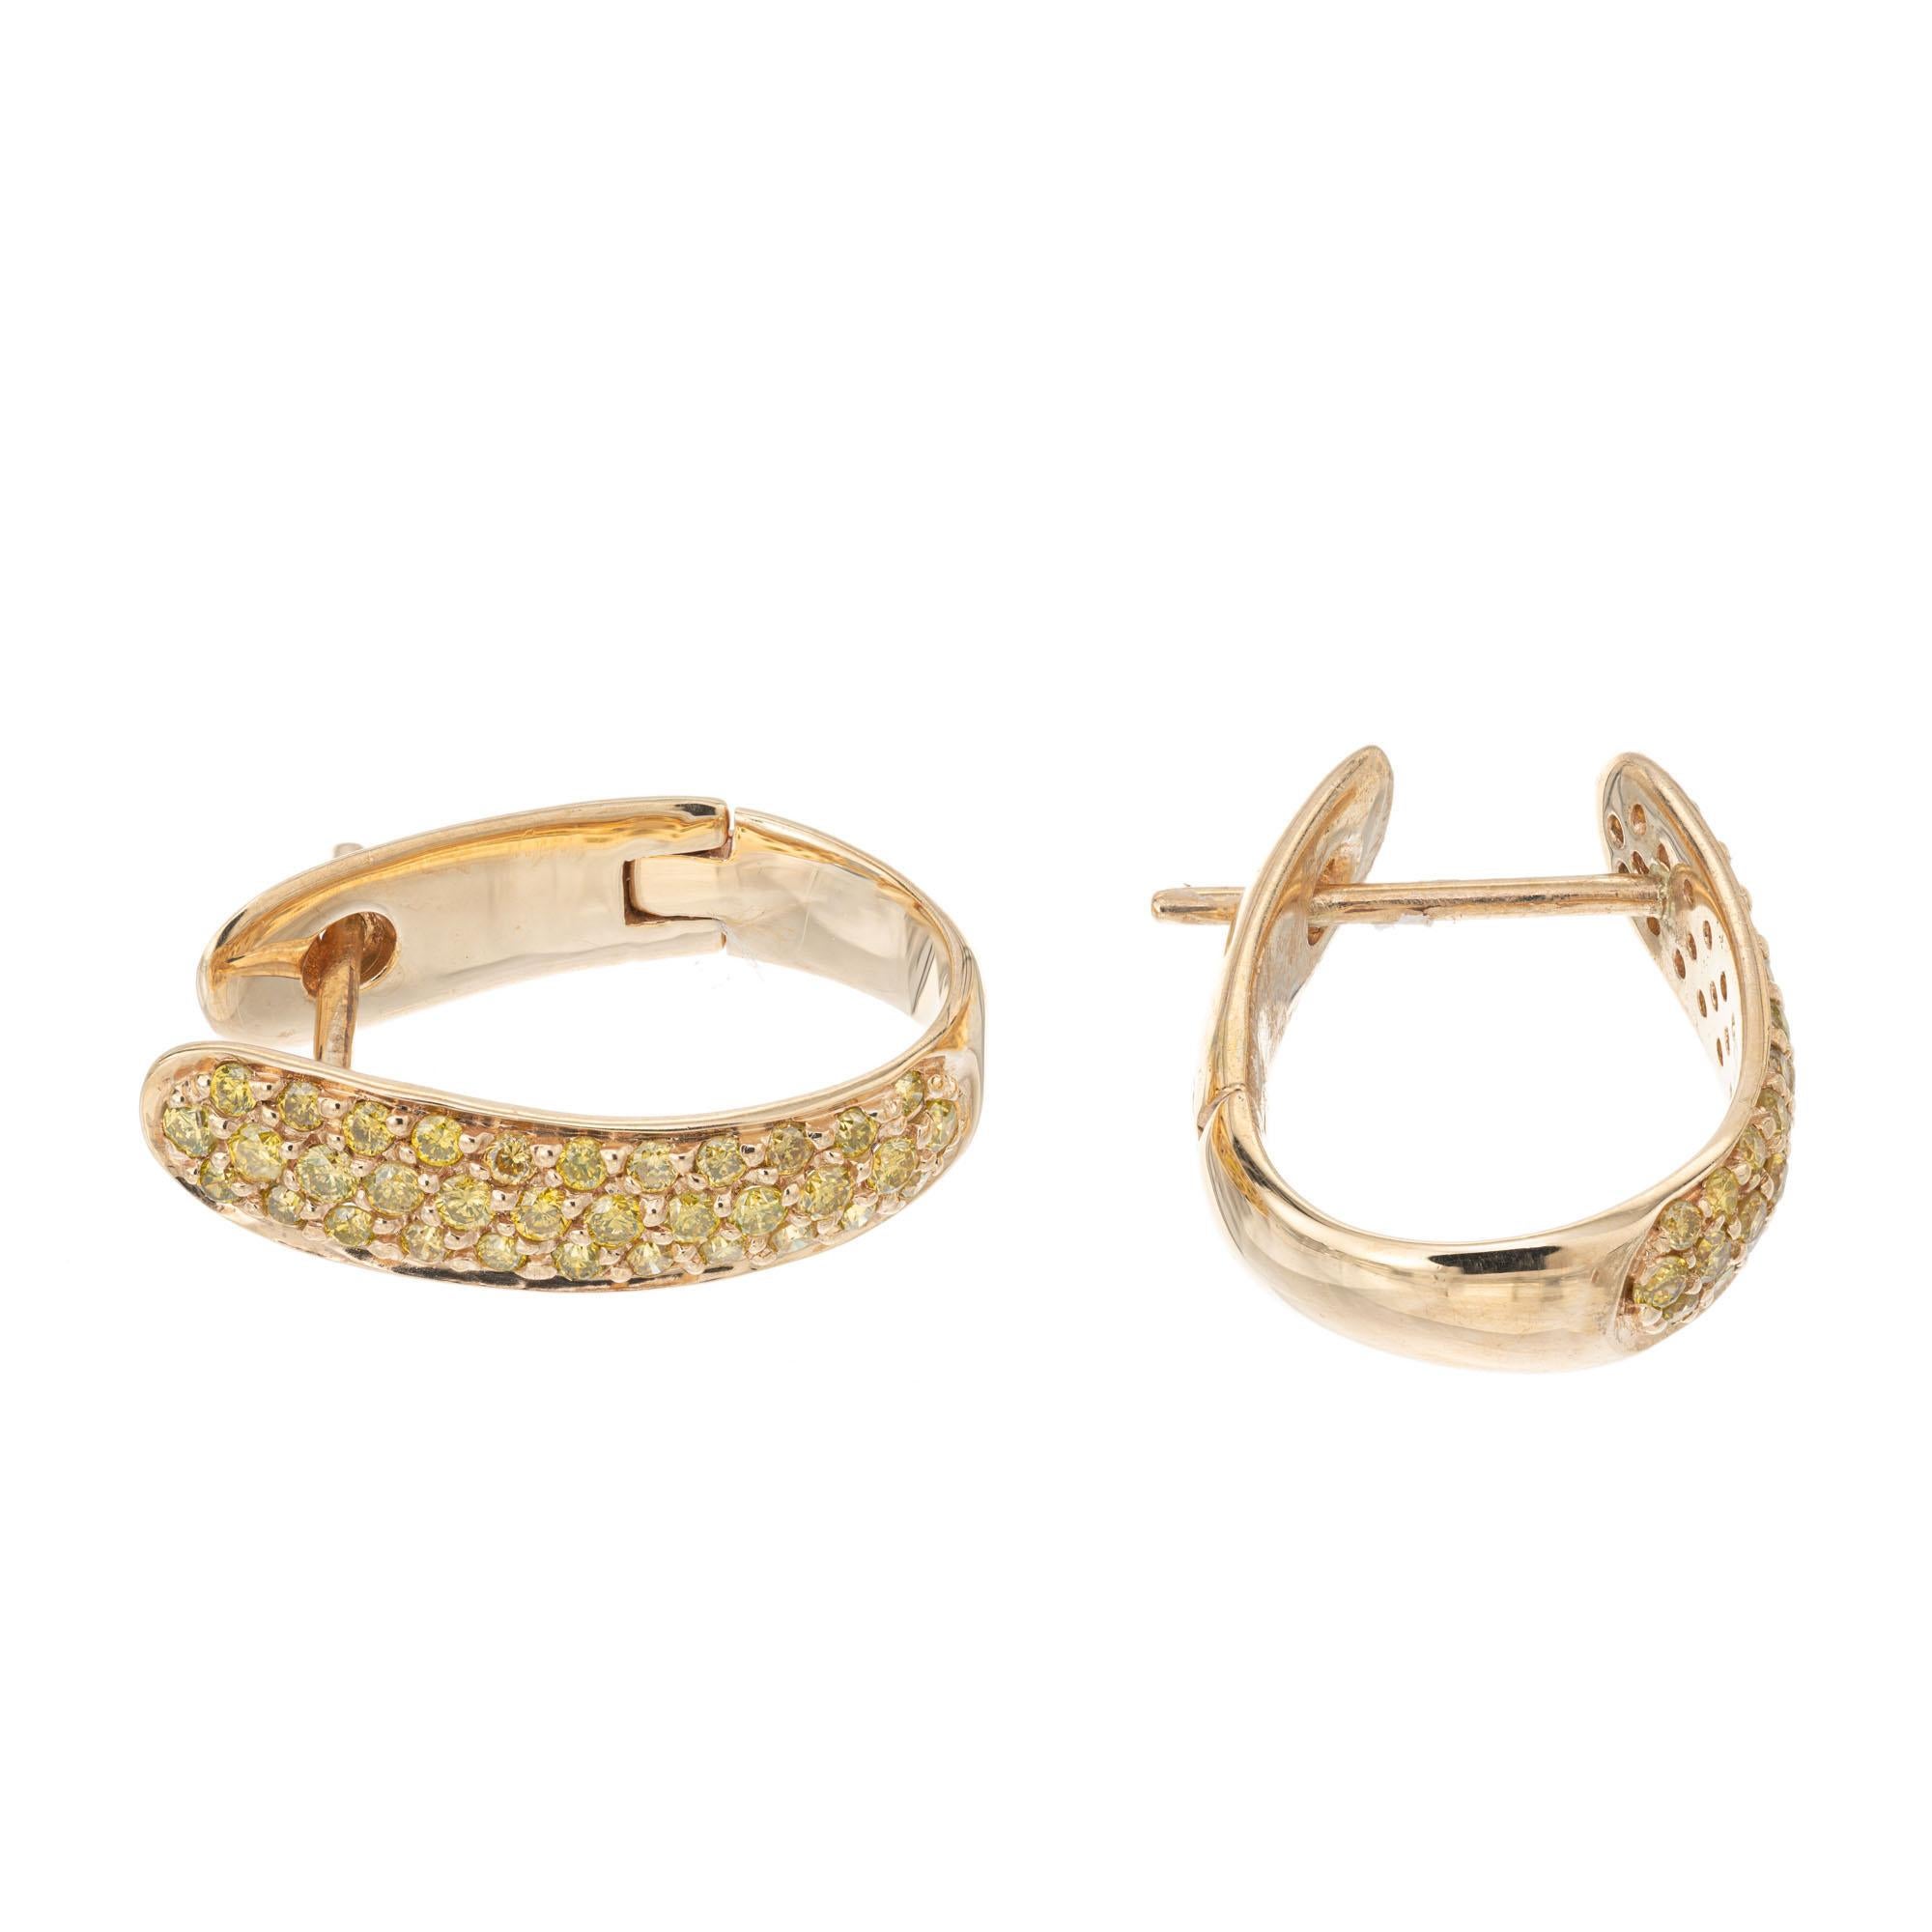 Diamond hoop earrings. Pave set round brilliant cut yellow diamonds in 14k yellow gold hoop earrings.

68 round brilliant cut yellow diamonds, approx. .57cts
14k yellow gold 
Stamped: 14k
Hallmark: SR
3.5 grams
Top to bottom: 17.9mm or .75